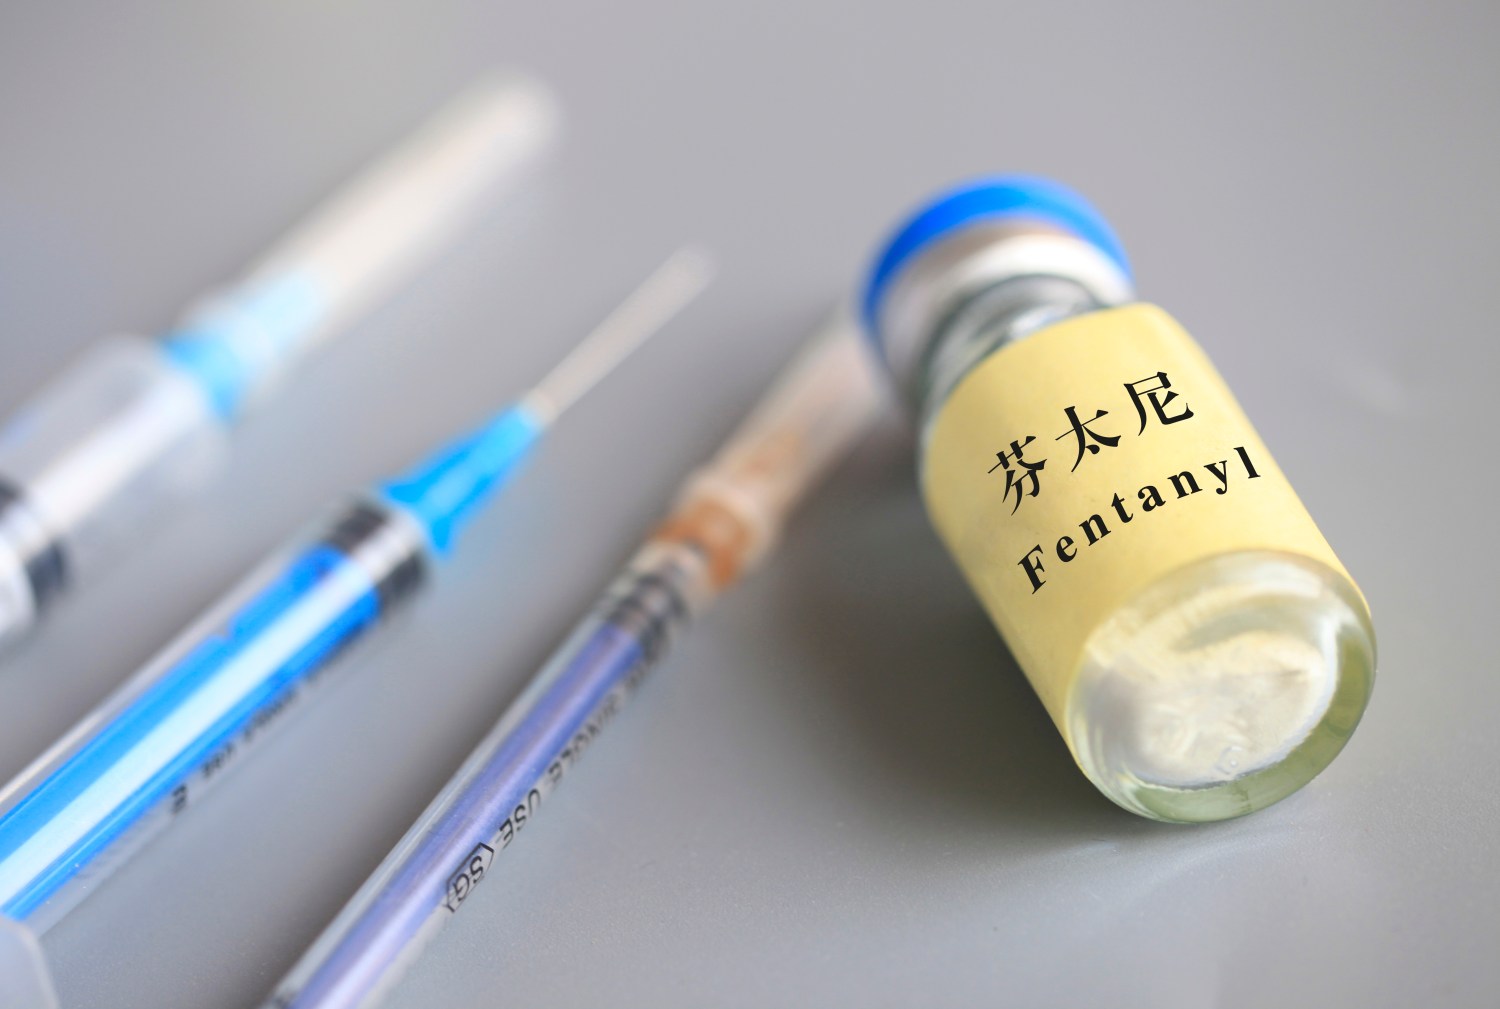 China will add fentanyl-related substances to a supplementary list of controlled narcotic drugs and psychotropic substances with non-medical use since May 1. The decision was announced Monday in a joint statement by the Ministry of Public Security, the National Health Commission and the National Medical Products Administration. Fentanyl and its analogues that were previously included in the list of controlled narcotic drugs and psychotropic substances, as well as the related substances in the supplementary list, will remain to be controlled according to relevant regulations, the statement said. Chang zhongzheng, Oriental Image via Reuters Connect.